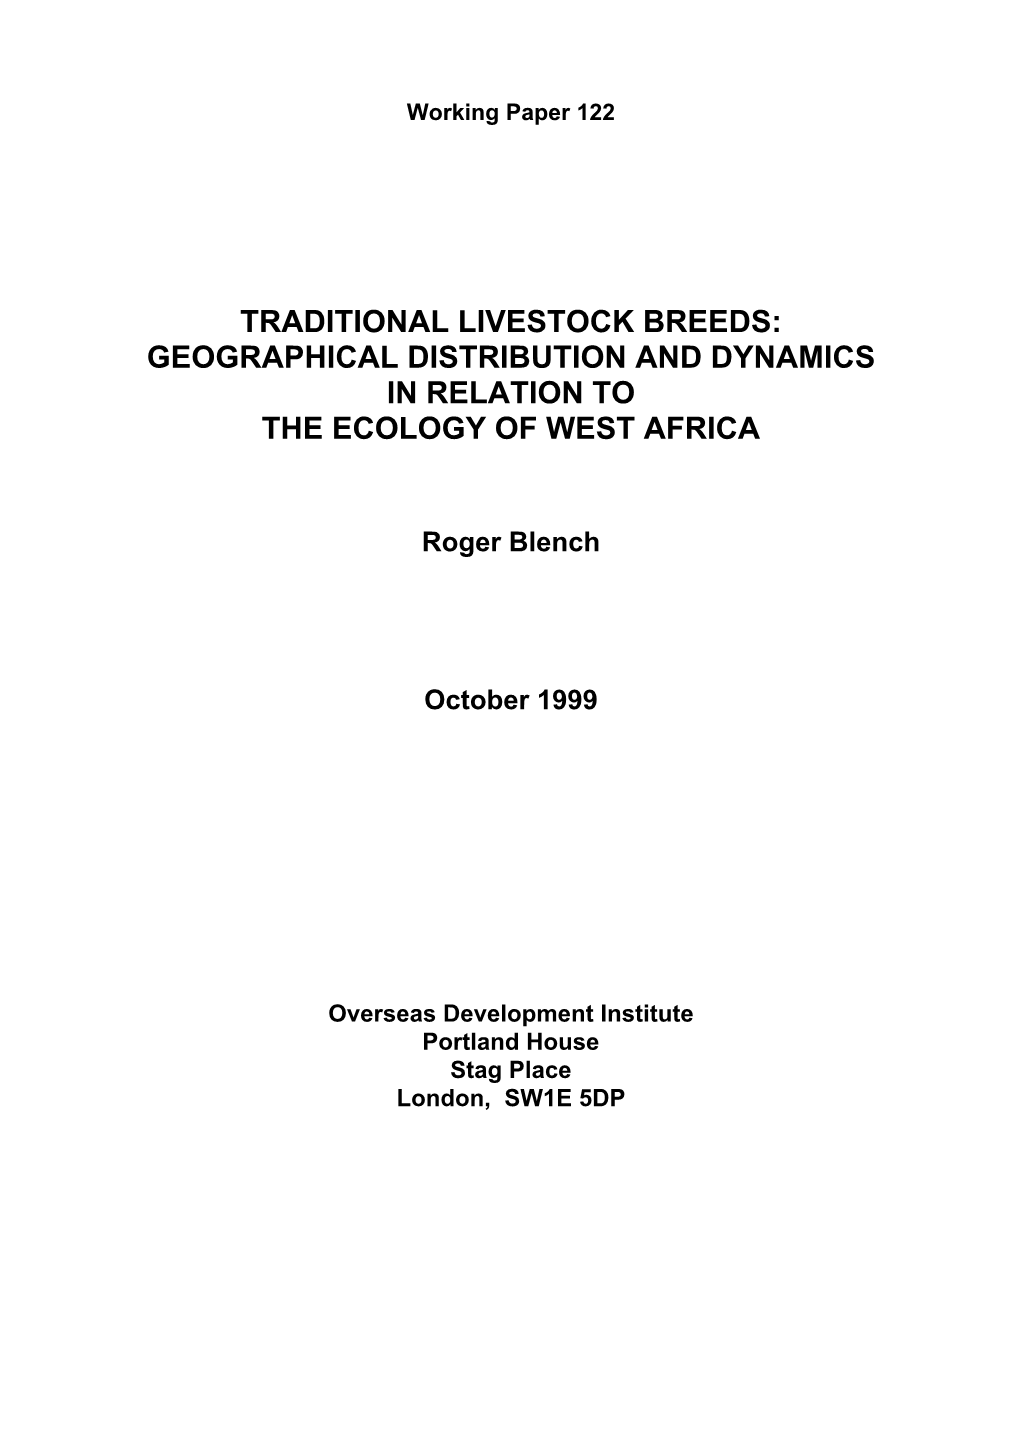 Traditional Livestock Breeds: Geographical Distribution and Dynamics in Relation to the Ecology of West Africa